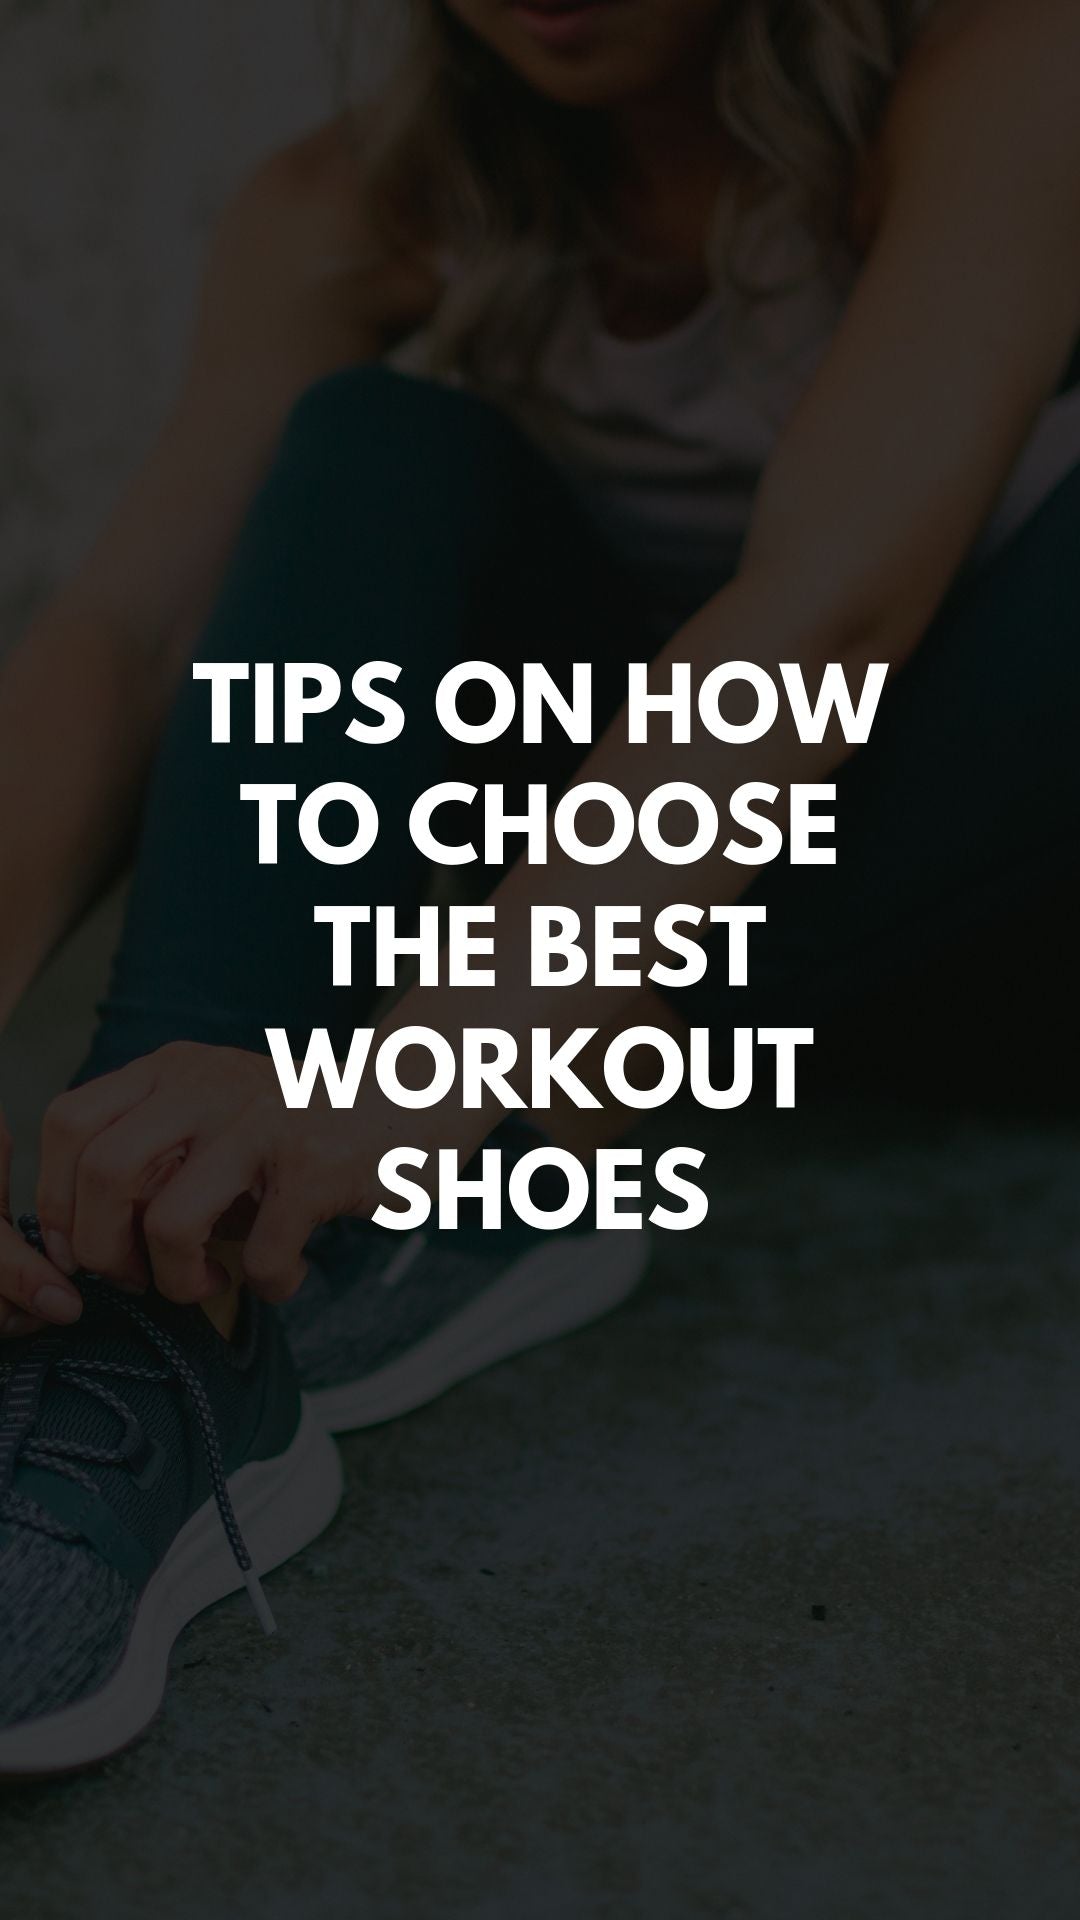 Tips On How To Choose The Best Workout Shoes